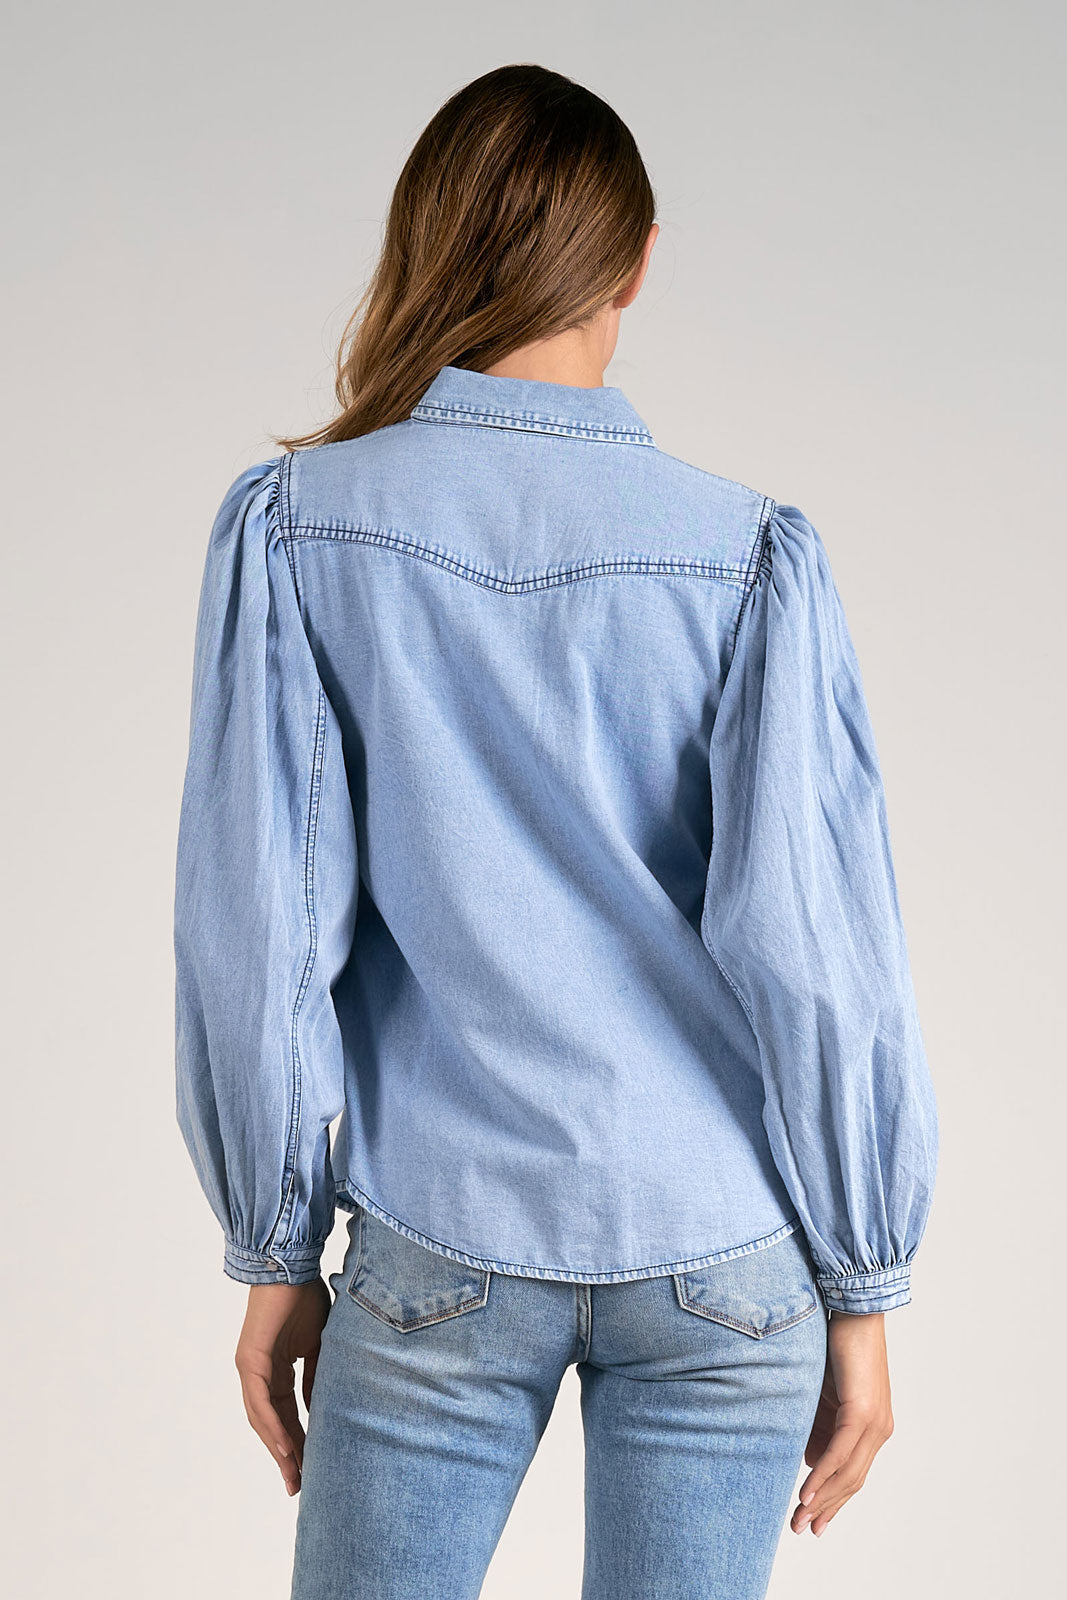 Long Sleeve Button Down Wide Top